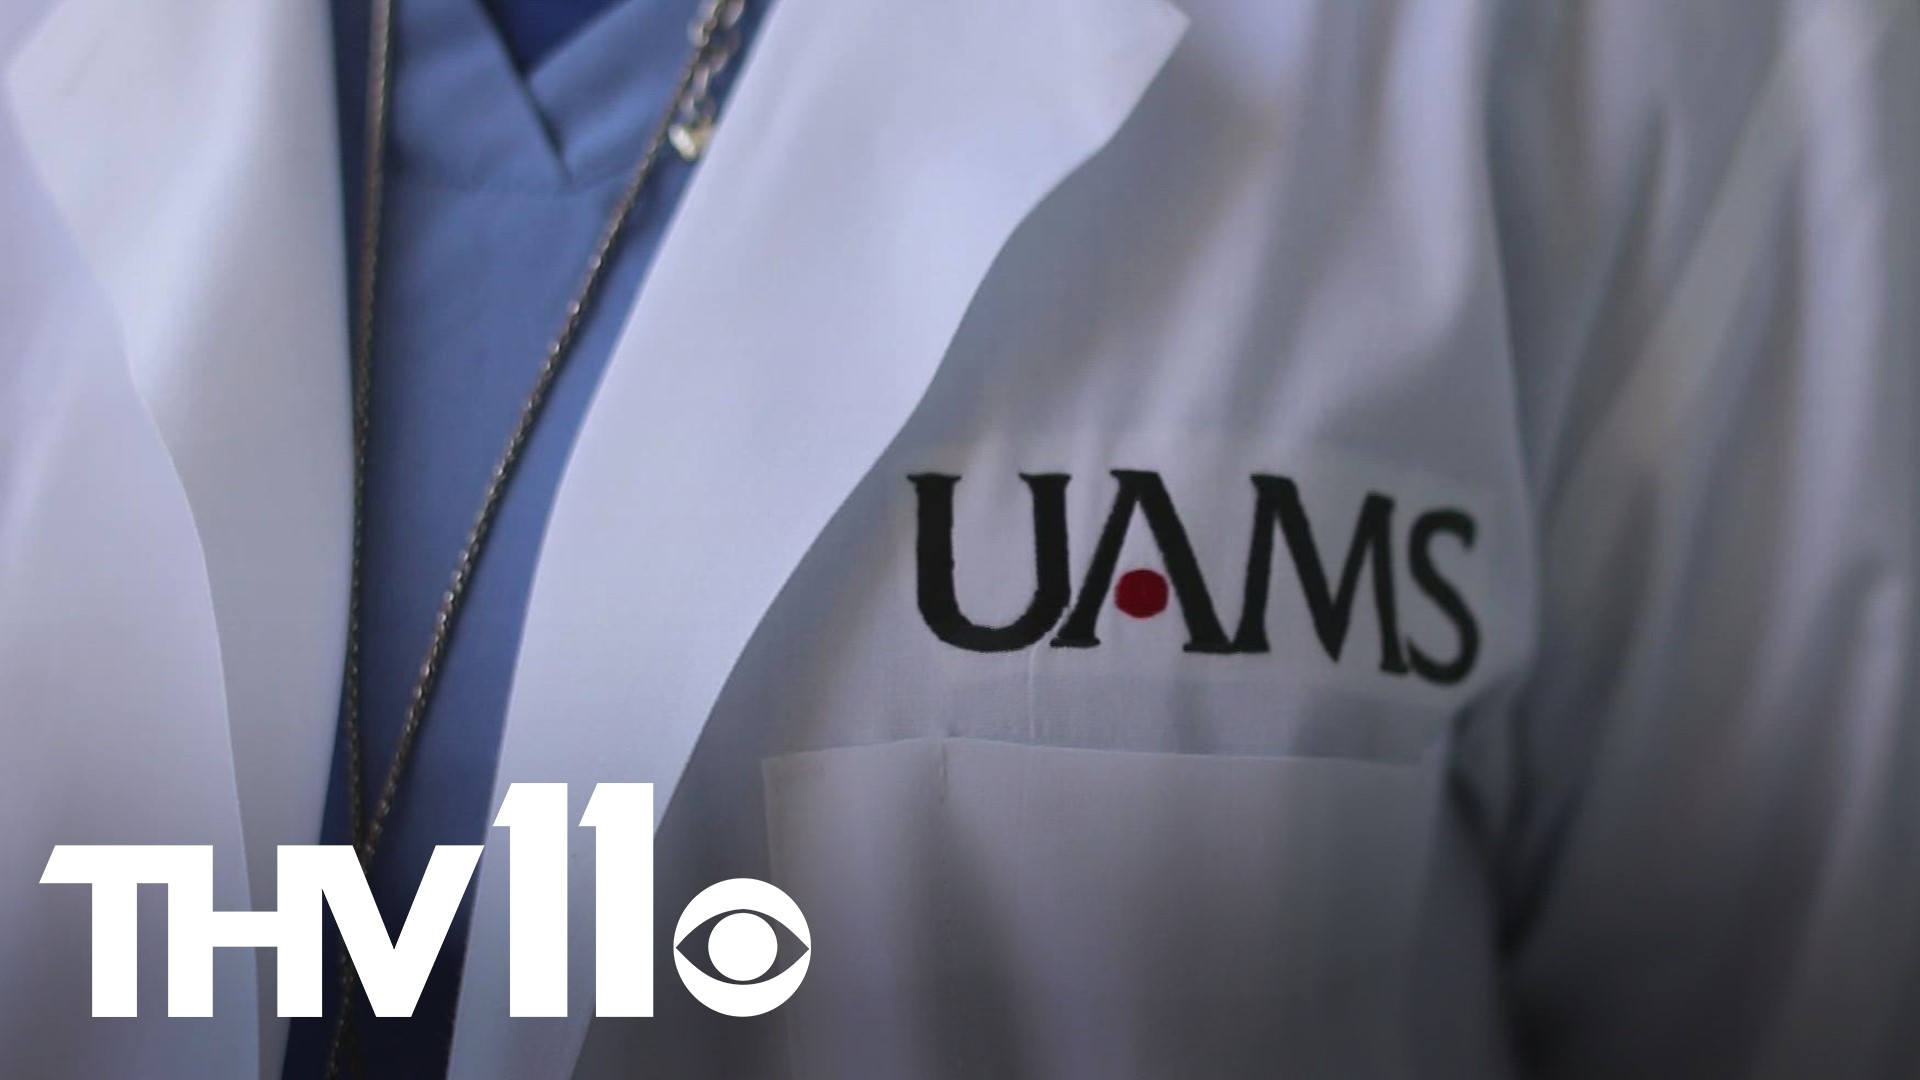 A new program at UAMS is not only saving students money, but hoping to train physicians faster to practice in Arkansas.